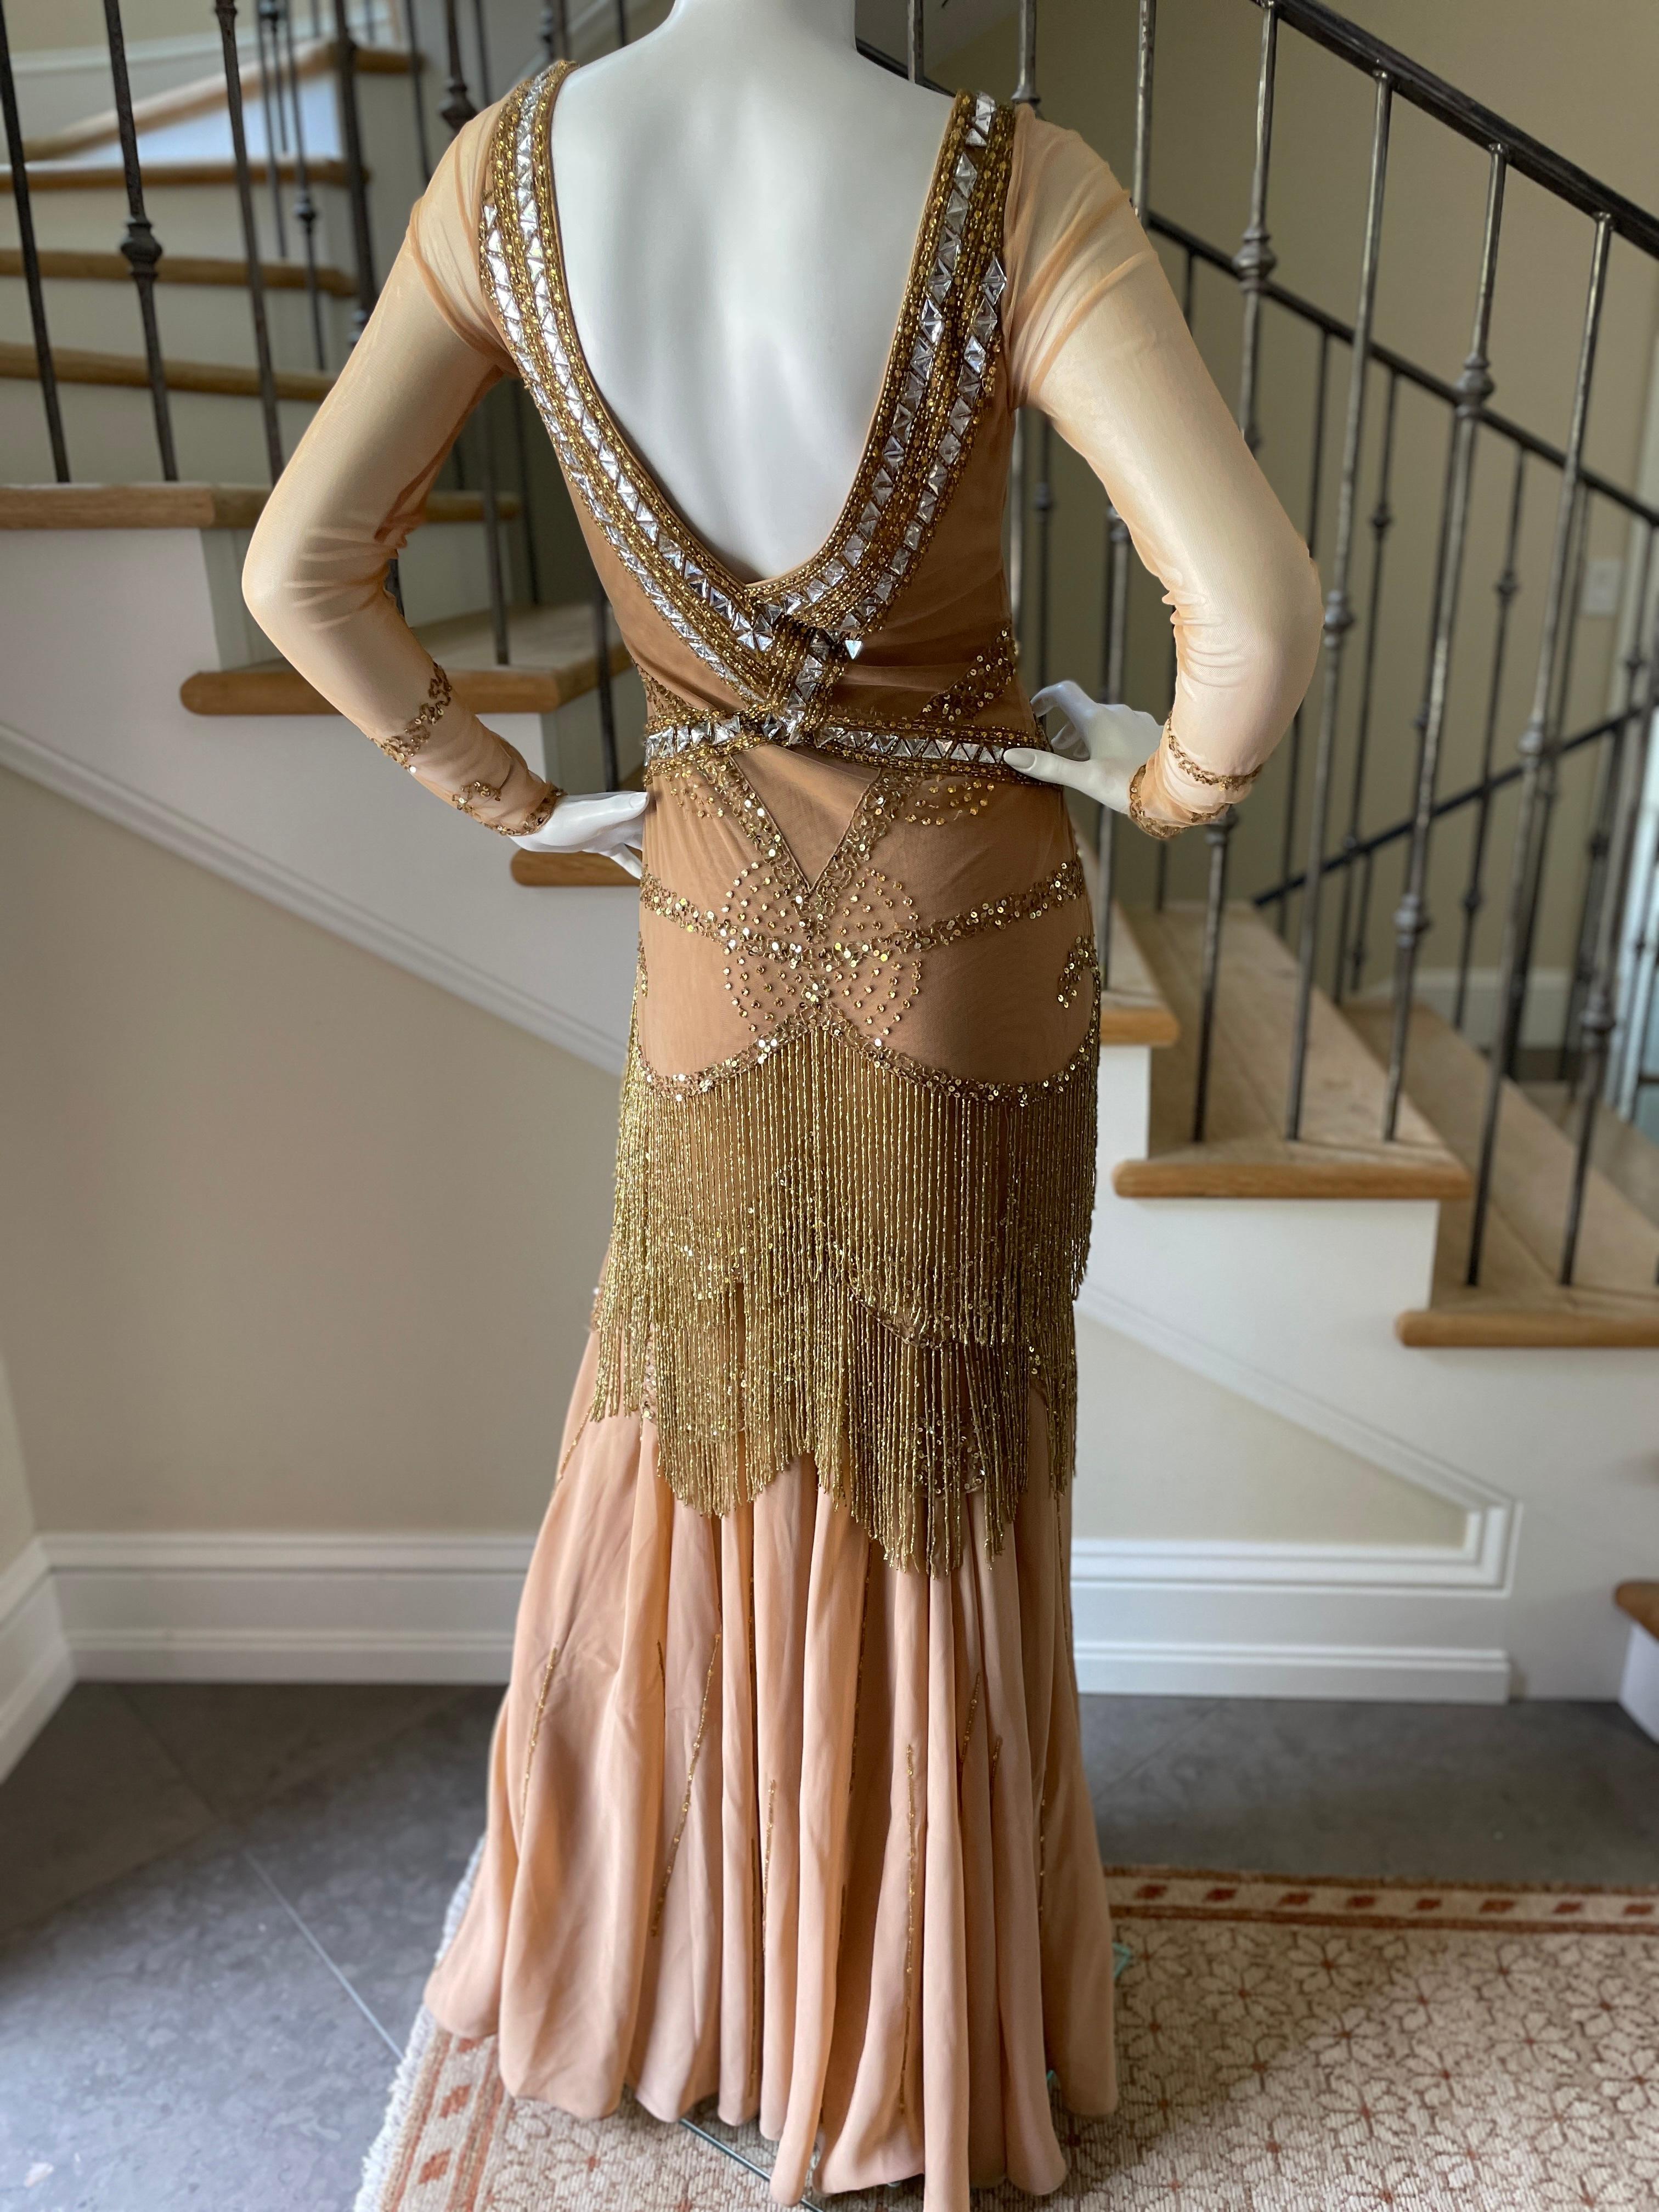 Class Cavalli Extravagantly Jeweled Vintage Evening Dress with Beaded Fringe For Sale 2